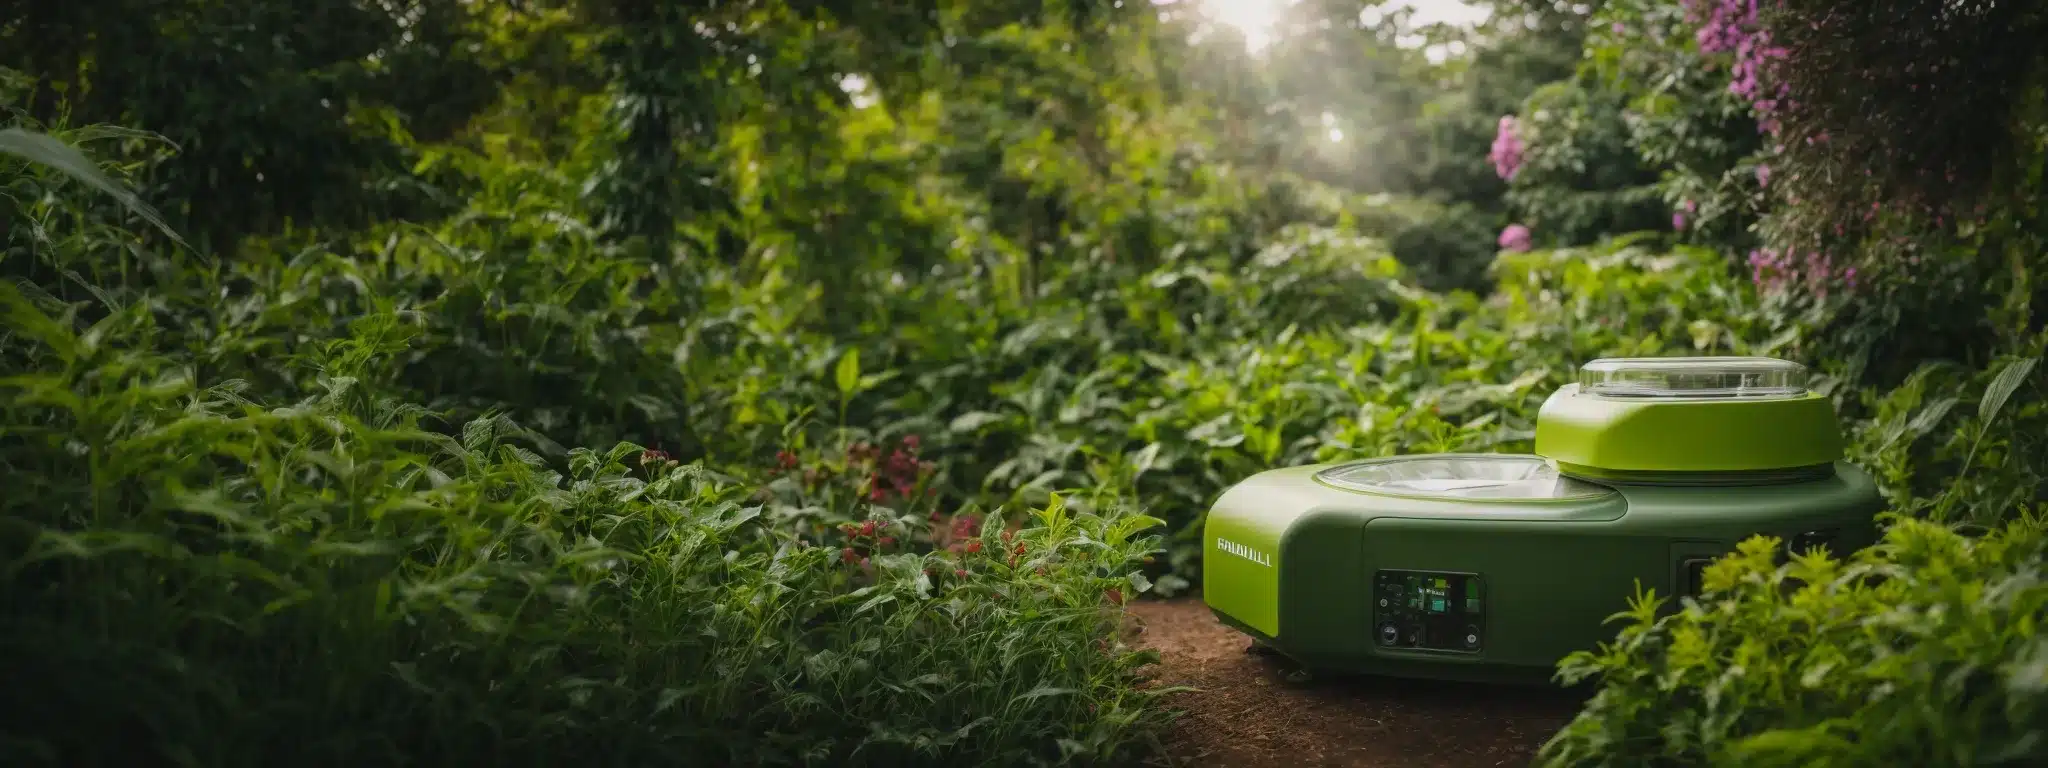 A Visionary Entrepreneur Unveils An Innovative, Eco-Friendly Device Amid The Vibrant Flora Of A Green Expo.